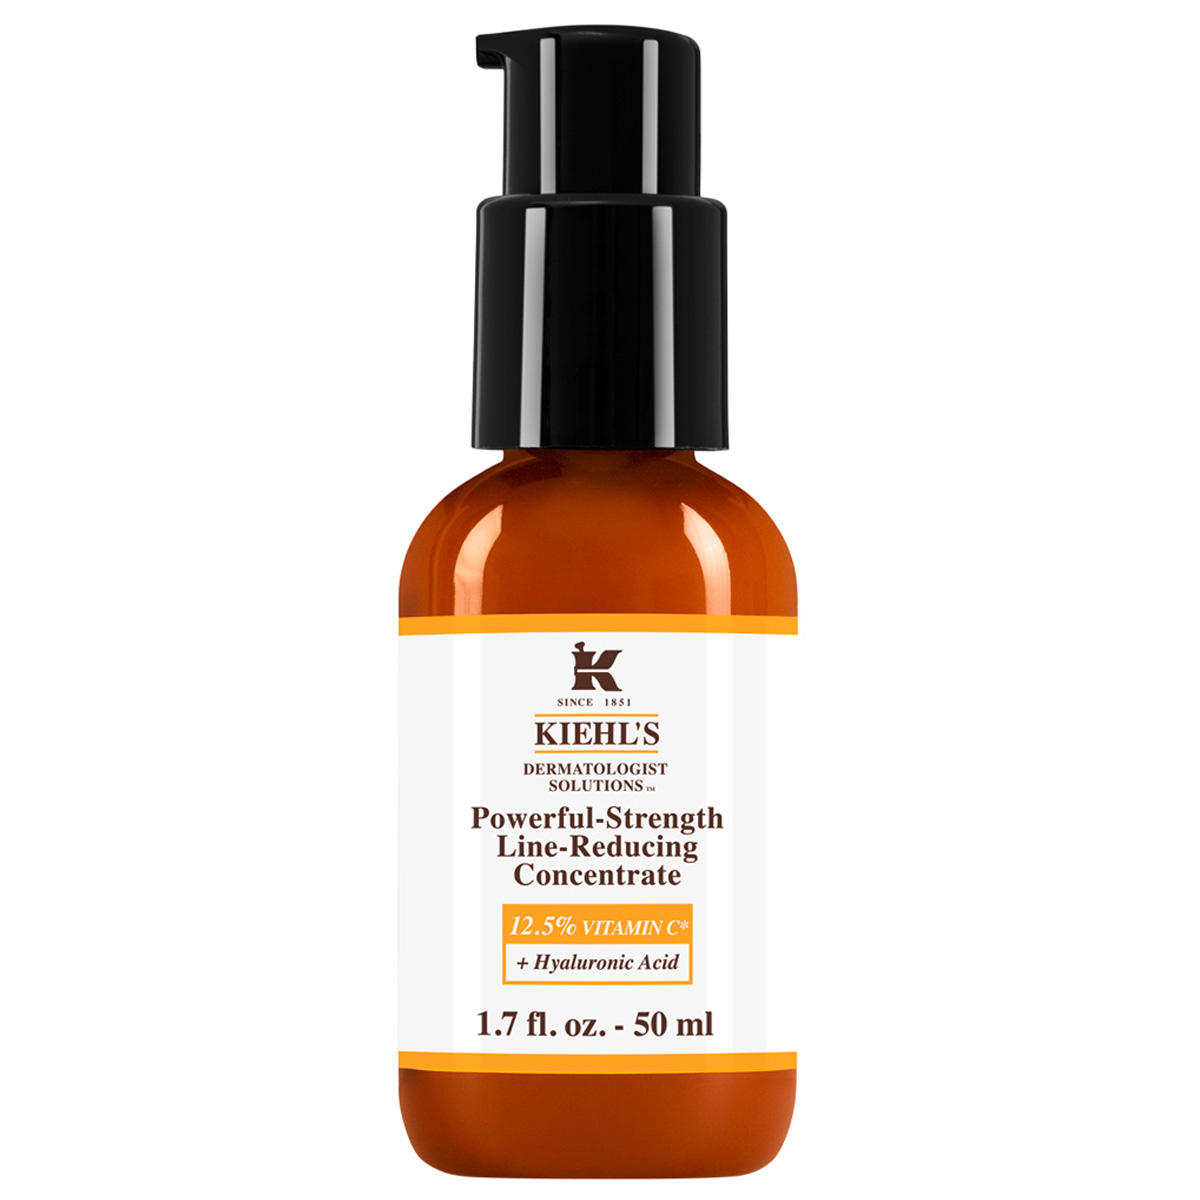 Kiehl's Powerful-Strength Line-Reducing Concentrate  - 1